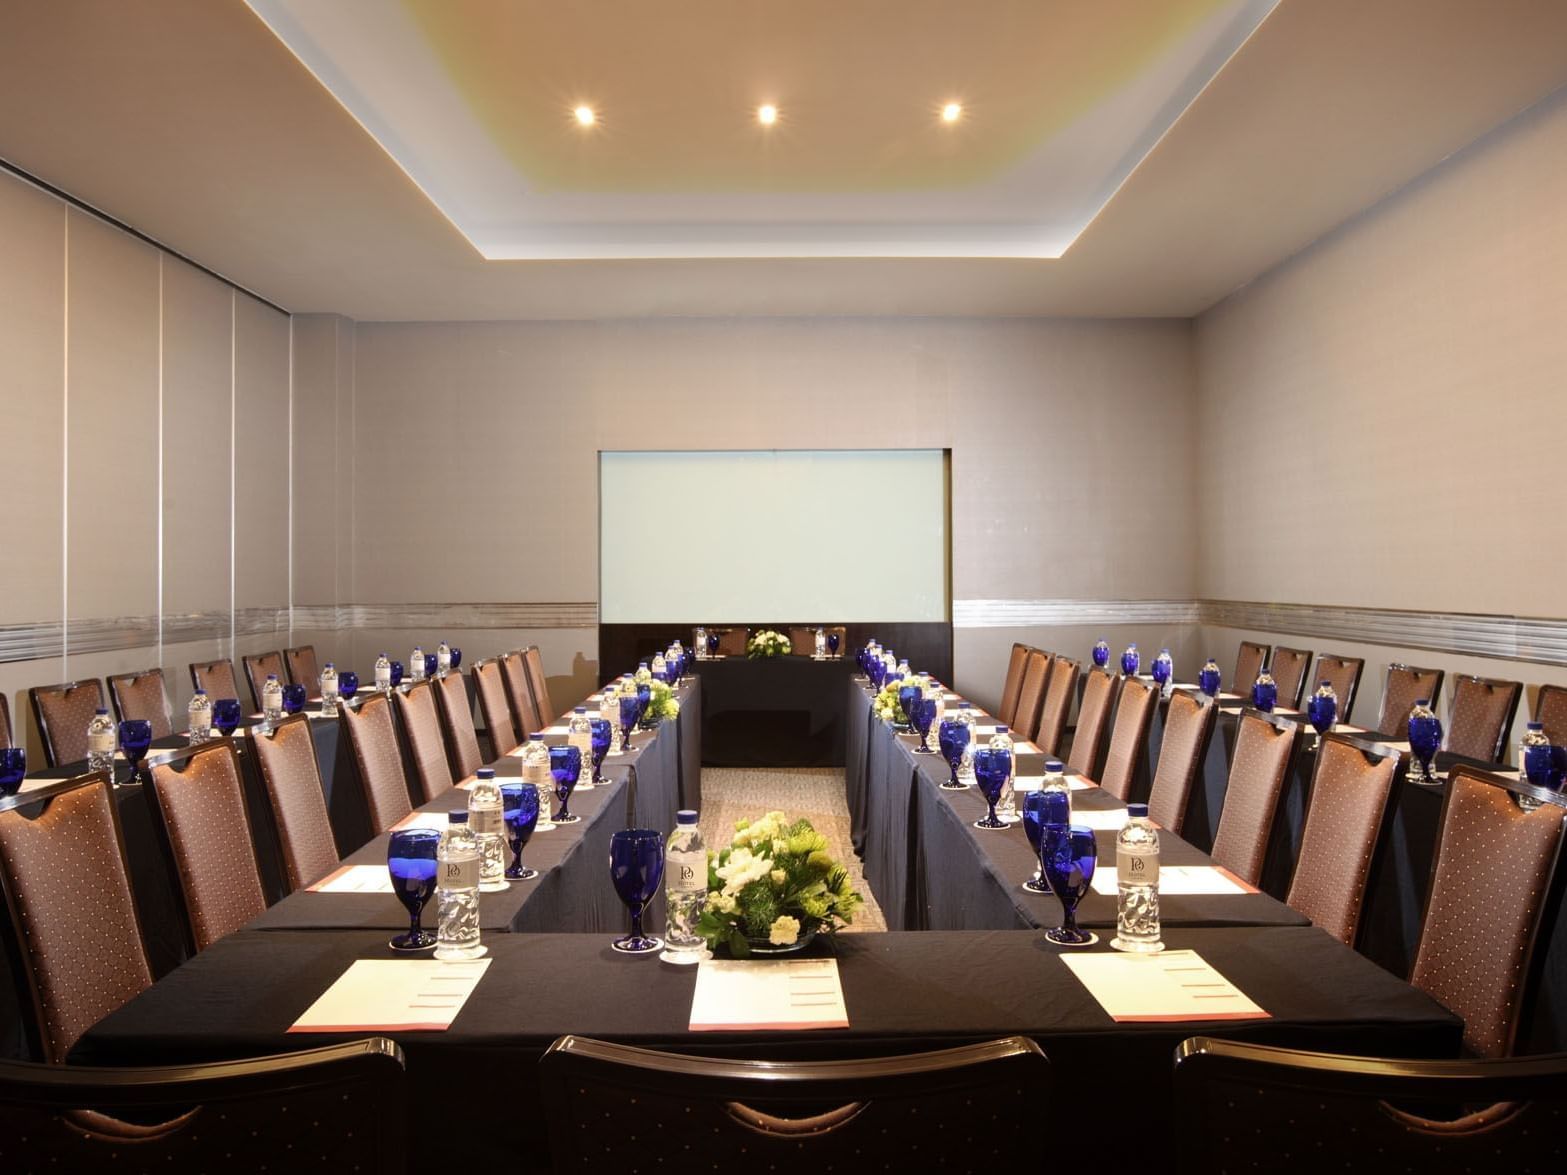 U shape table setup with projector screen in Meeting Room 1 / 2 / 3 / 4 at Po Hotel Semarang